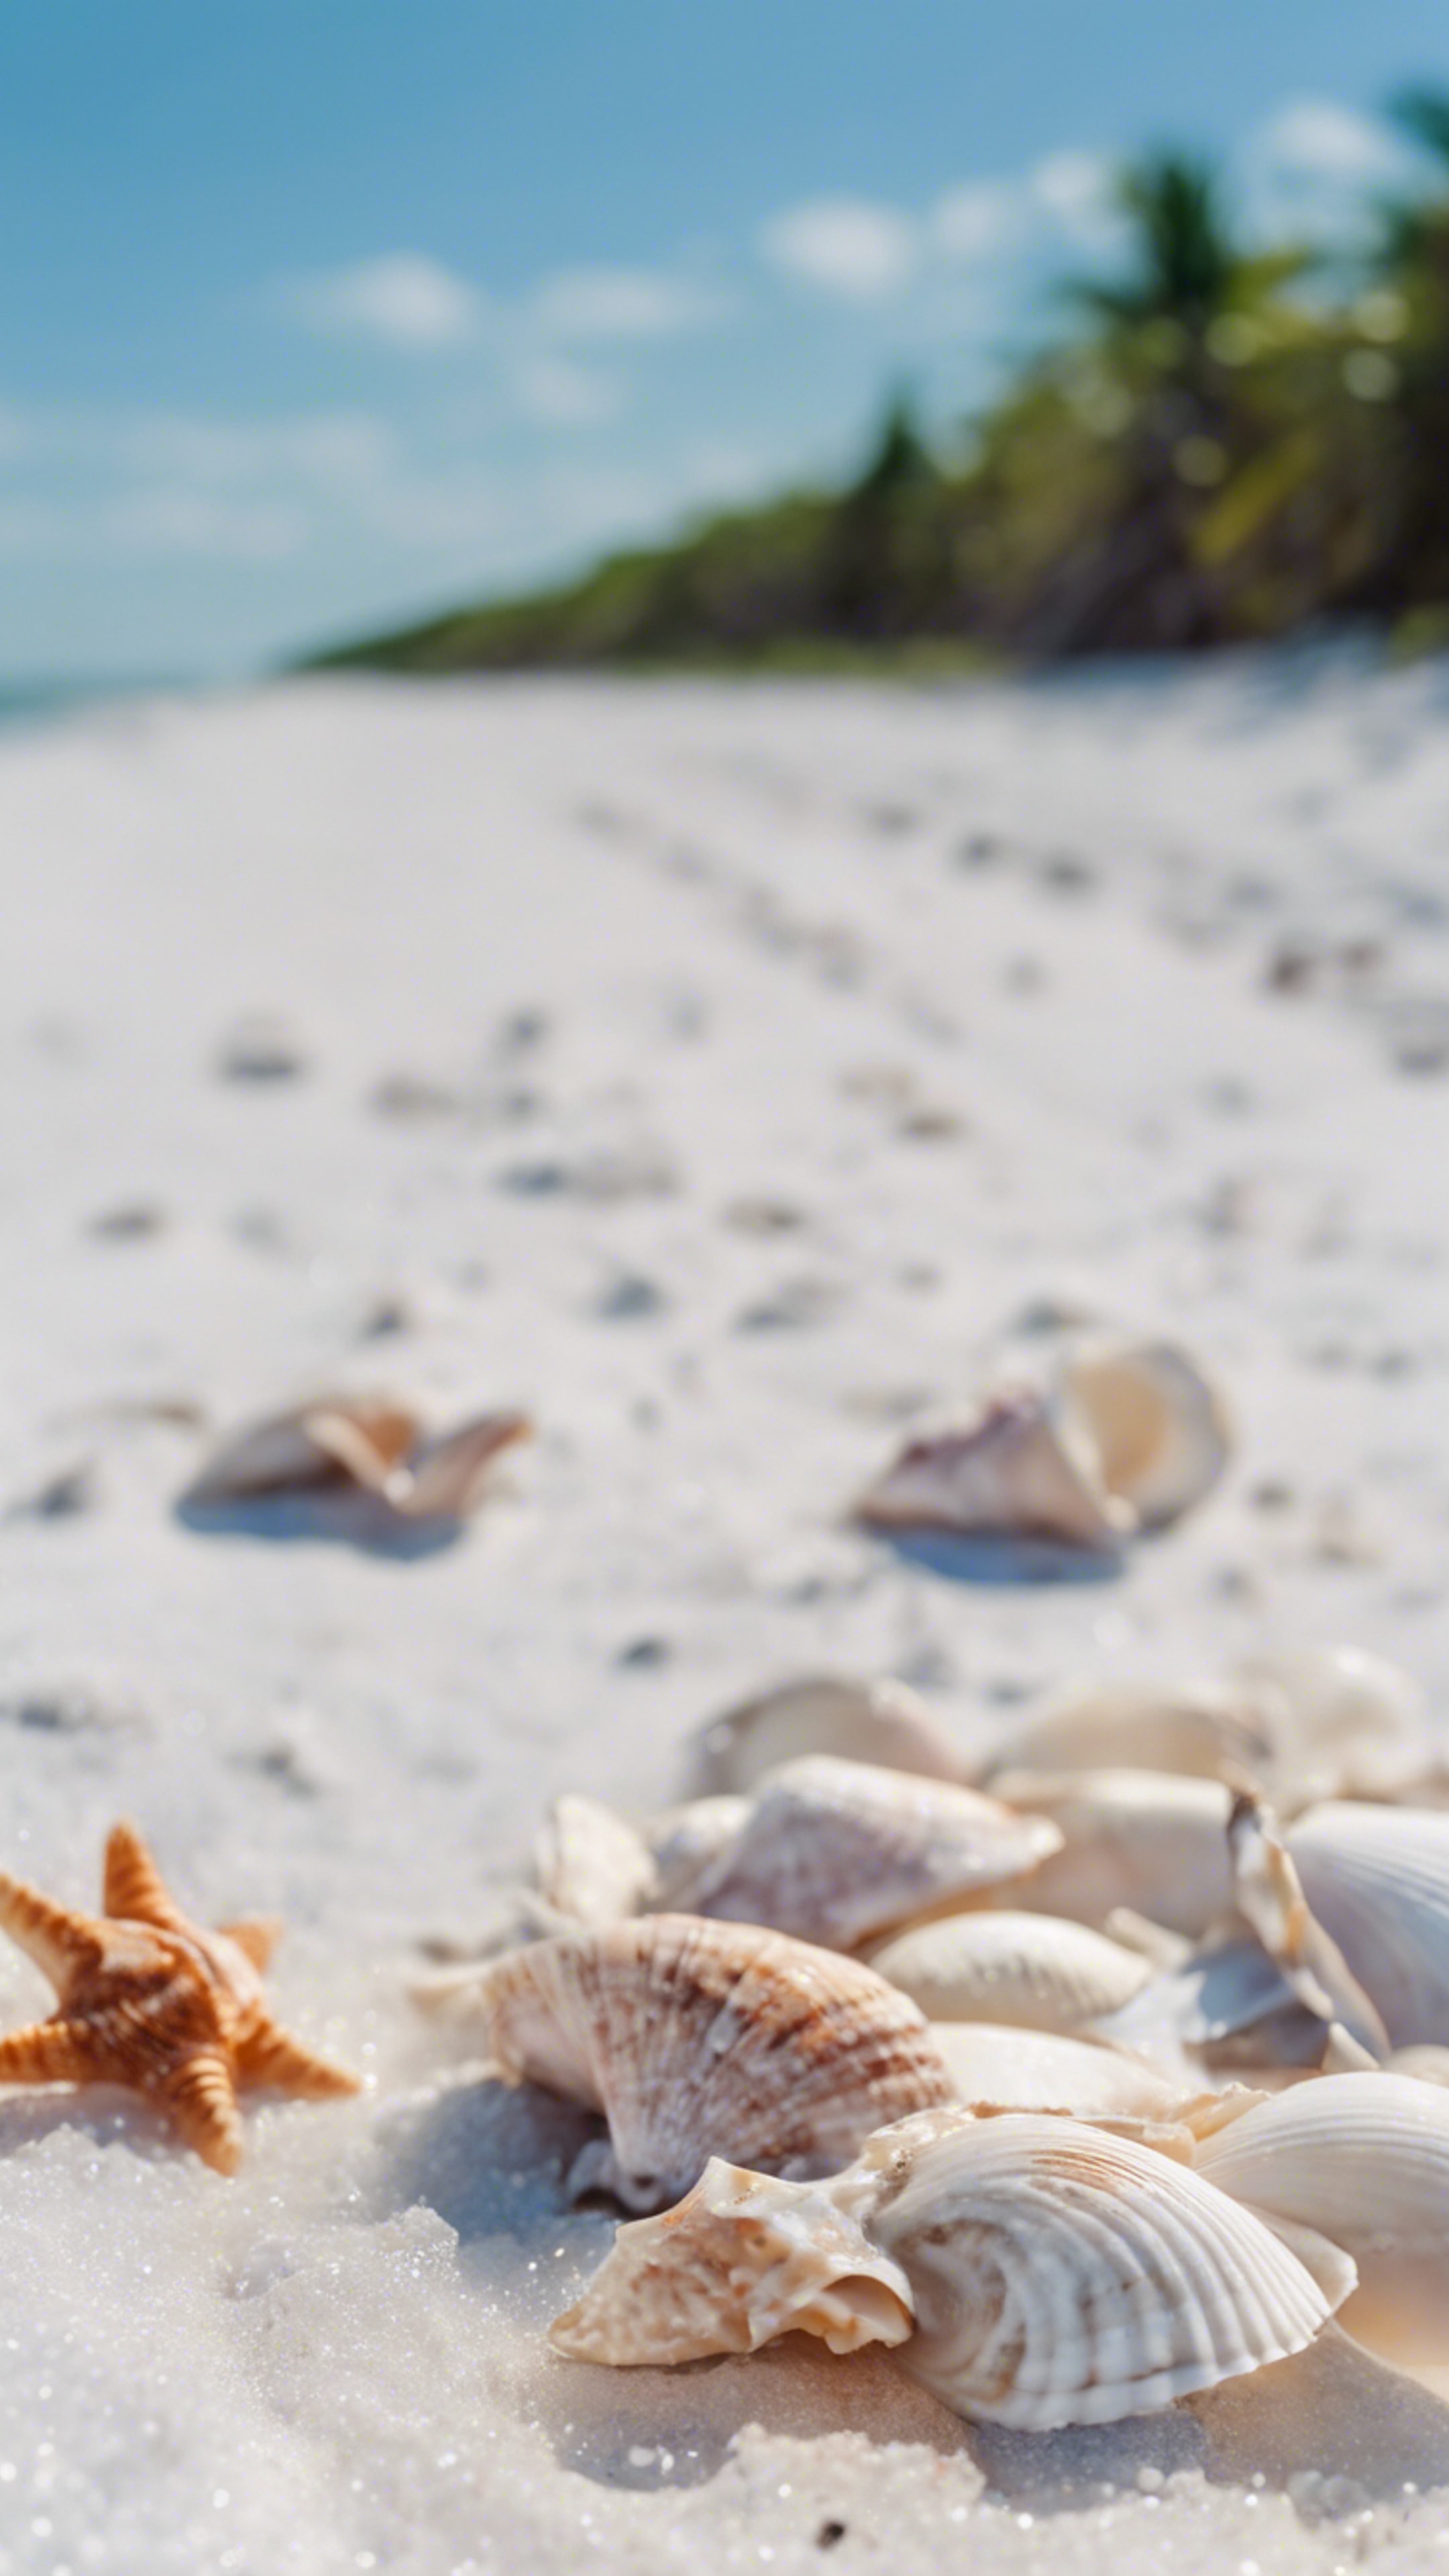 Seashells scattered along the pure white sandy beaches of Sanibel Island under clear, blue skies.